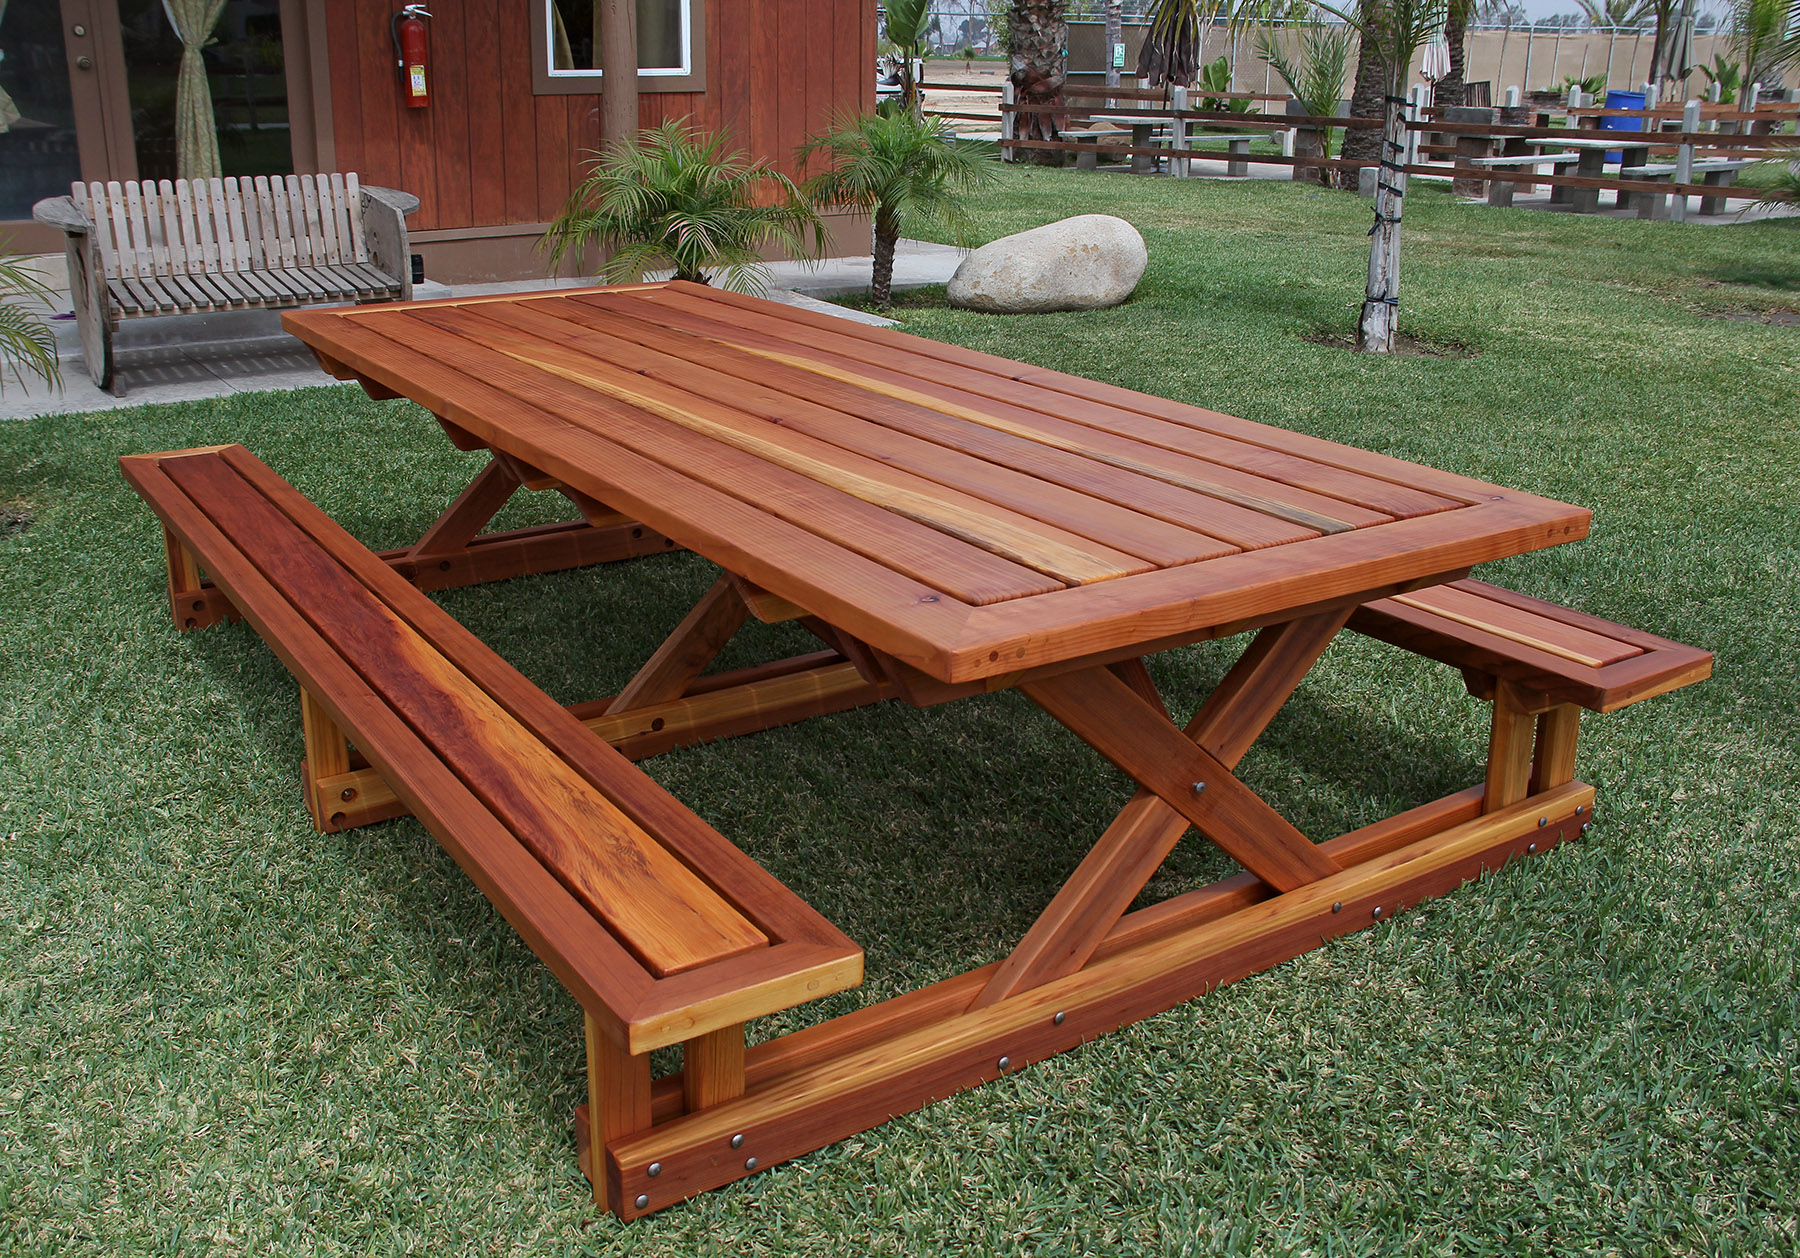 Chris's Picnic Table with Attached Benches Foreverredwood.com